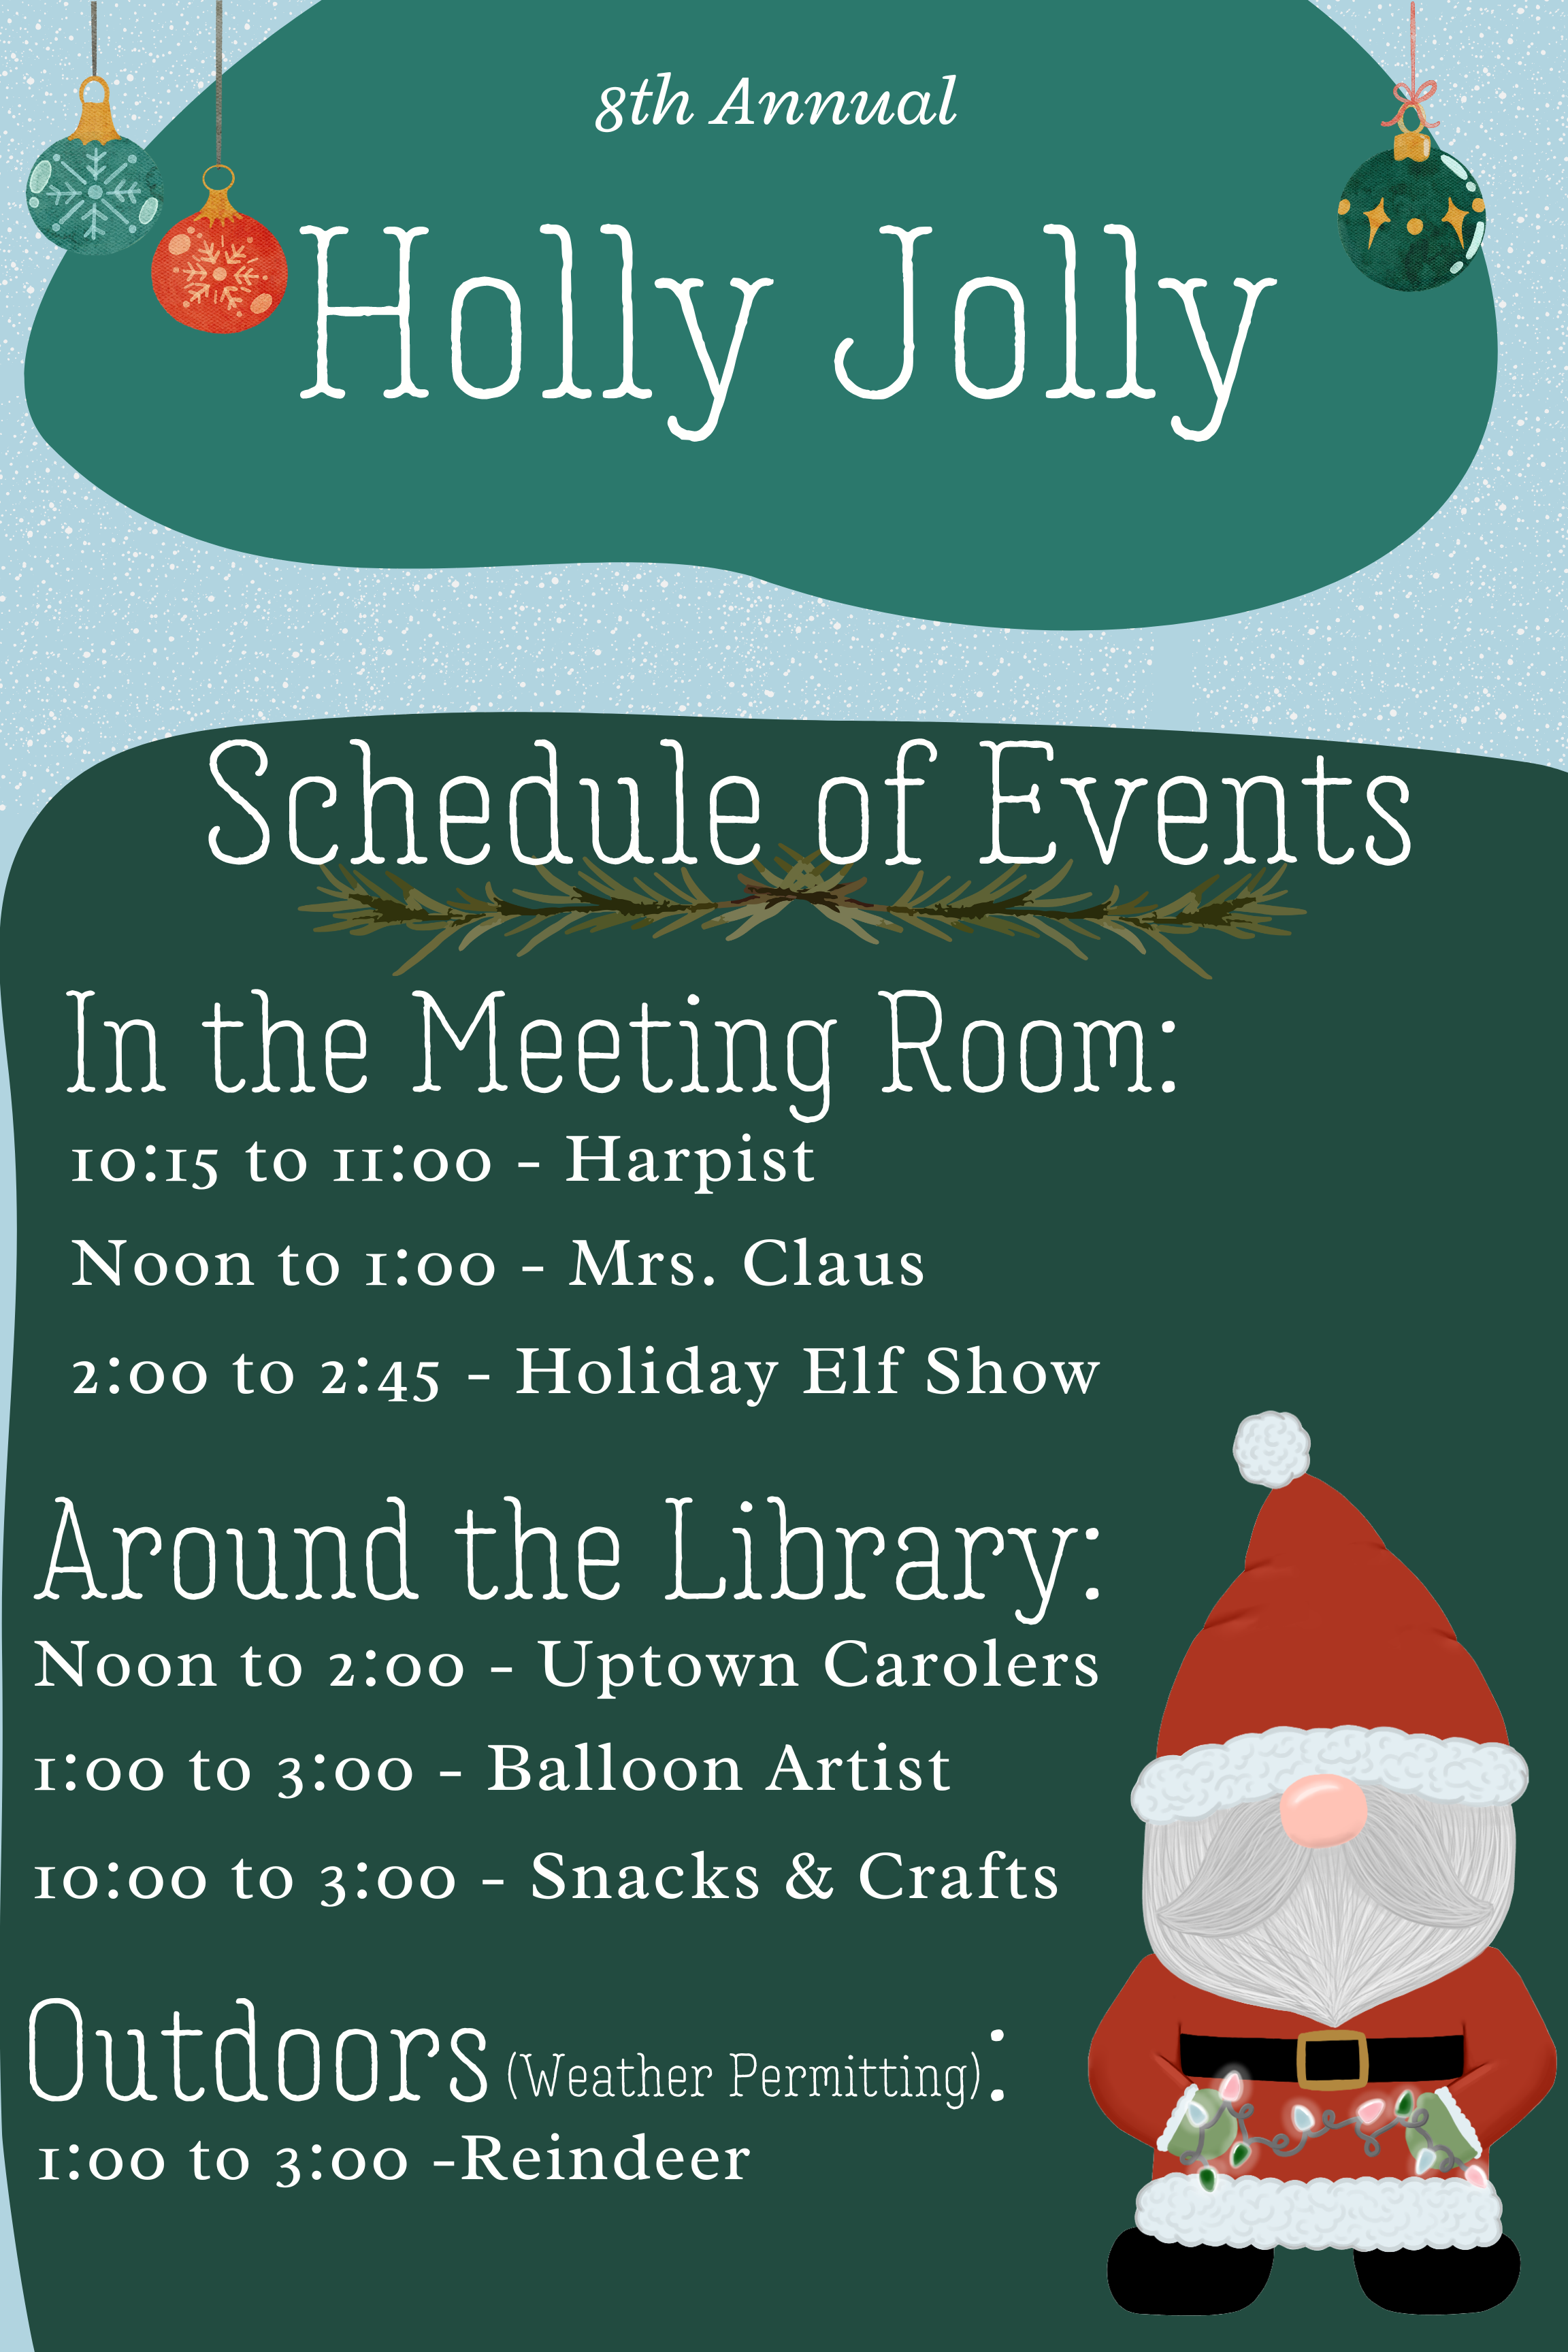 Holly Jolly Schedule of Events: Harpist, Mrs. Claus, Holiday Elf Show, Uptown Carolers, Balloon Artist, Snacks and Crafts, Reindeer.